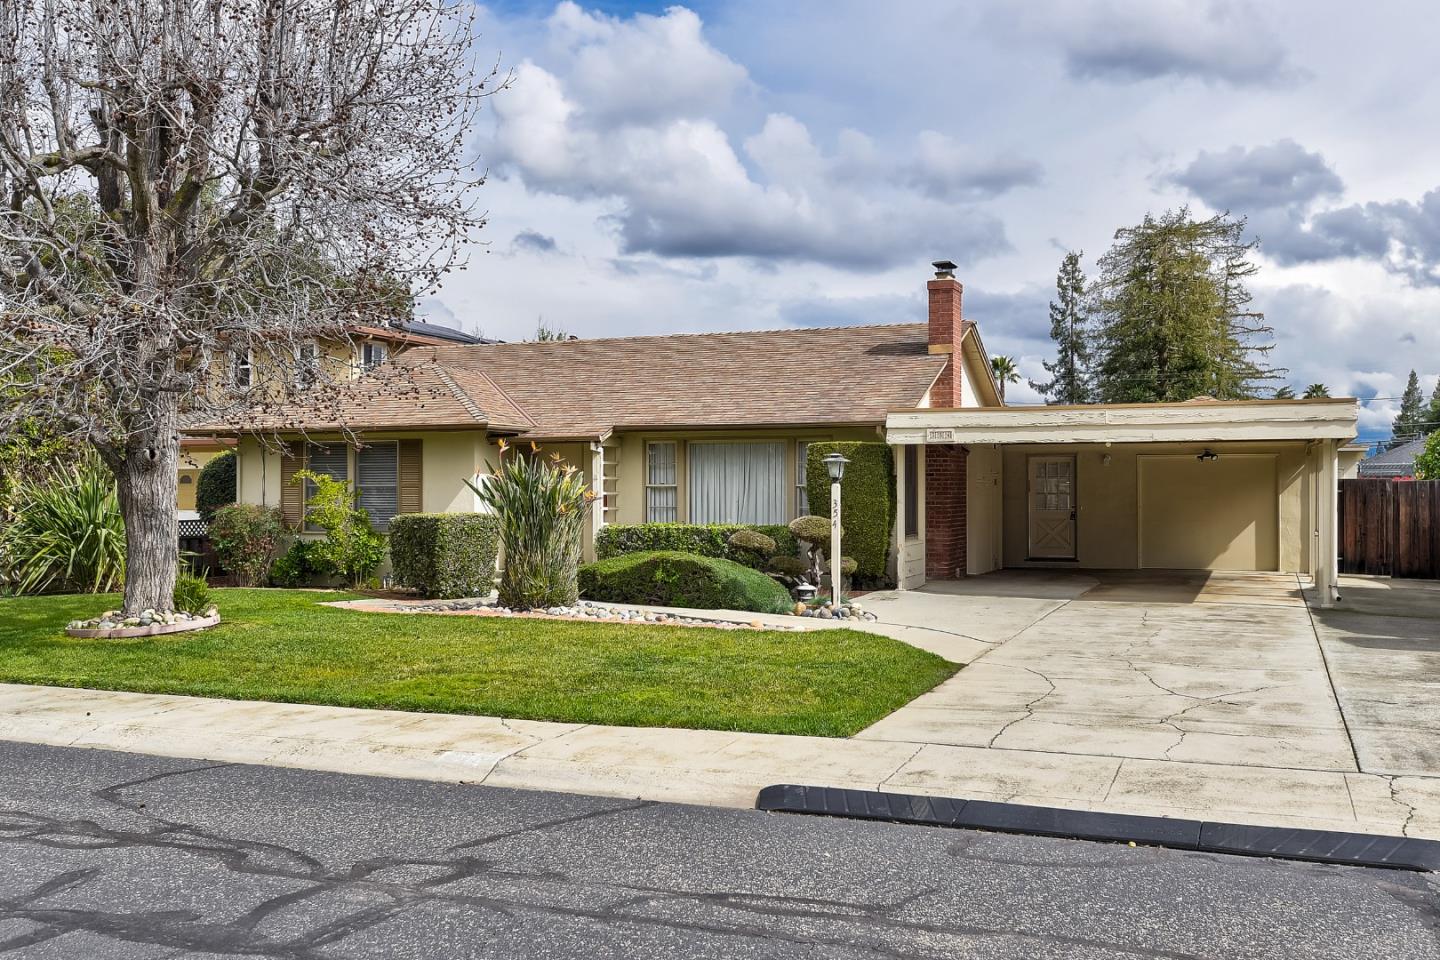 Photo of 354 Carlyn Ave in Campbell, CA